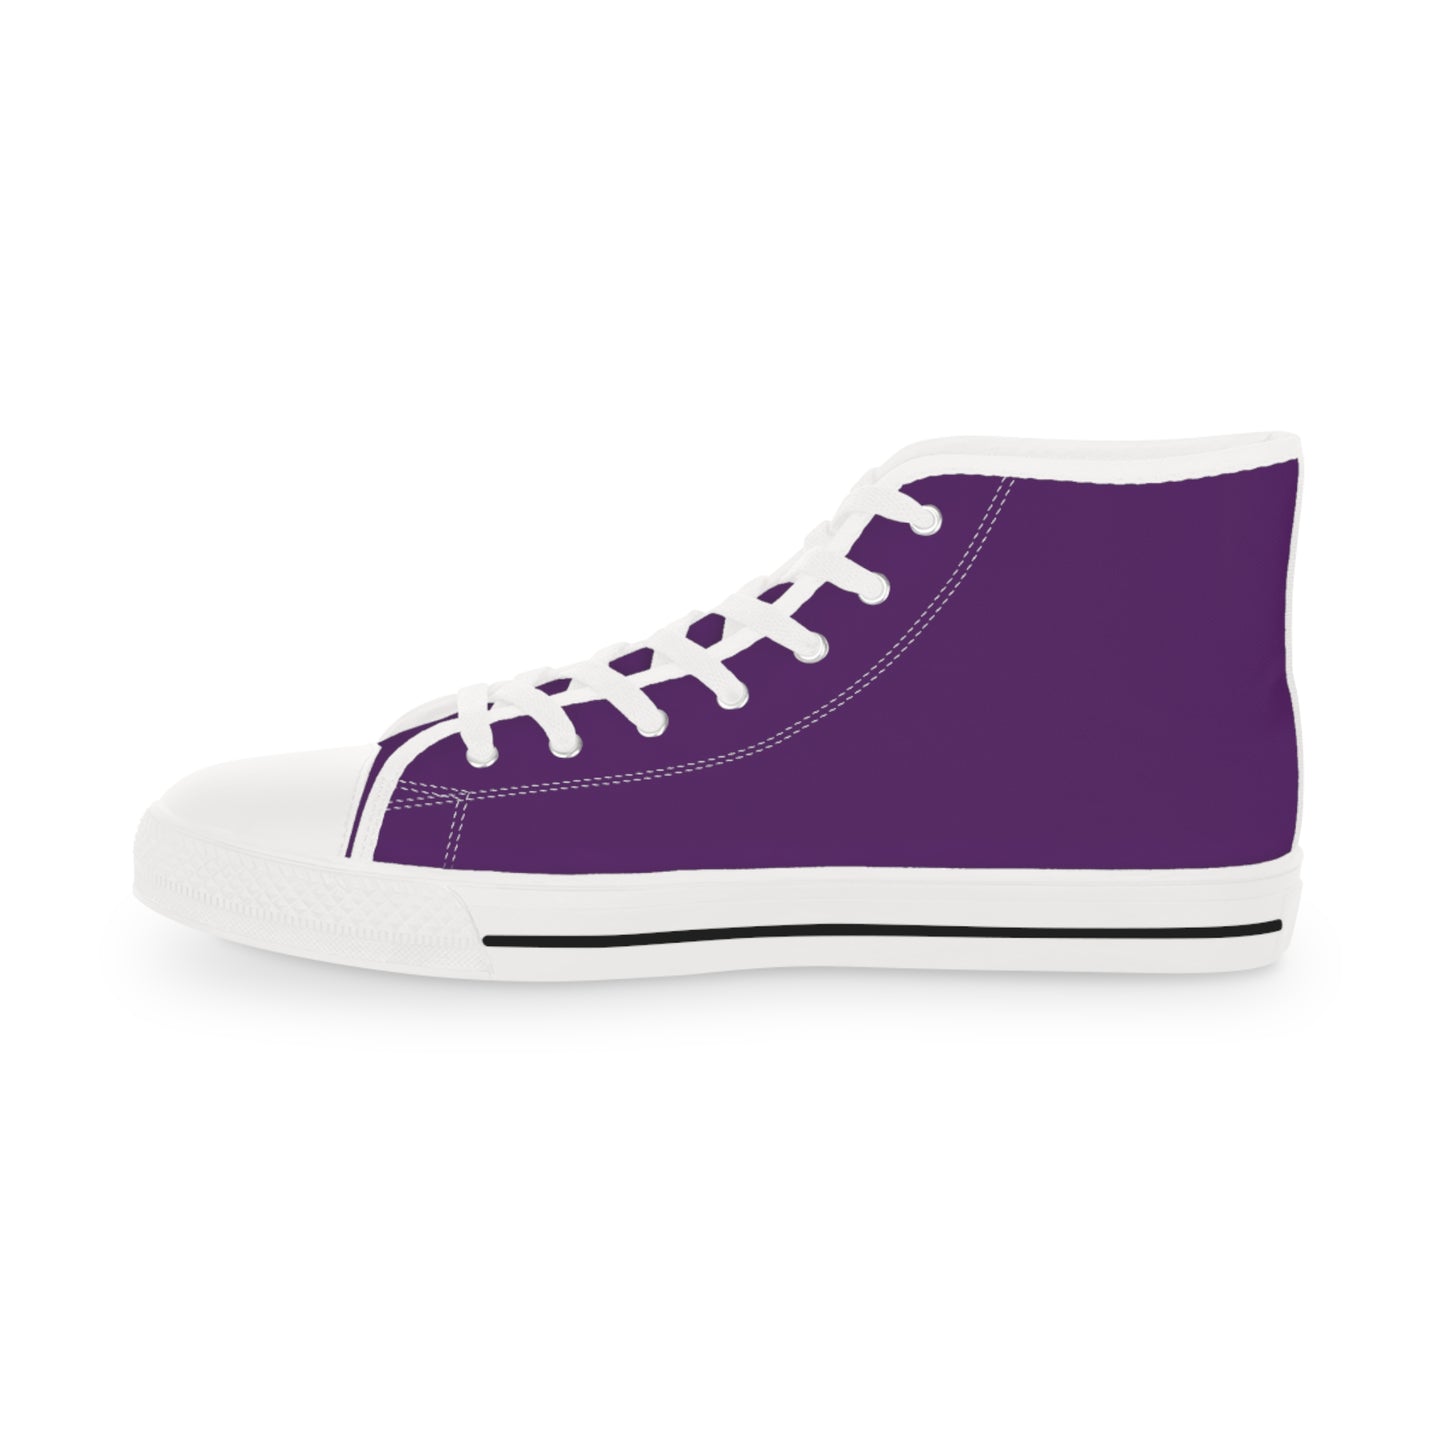 Men's Canvas High Top Solid Color Sneakers - Royal Purple US 14 White sole